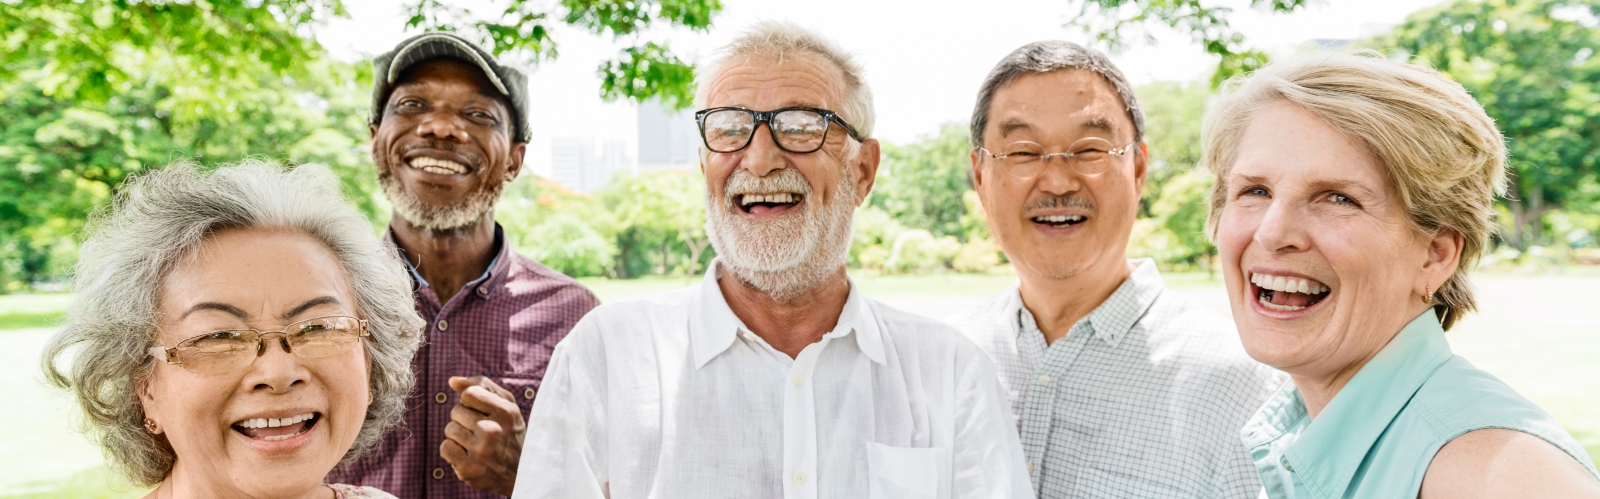 A group of older people, smiling